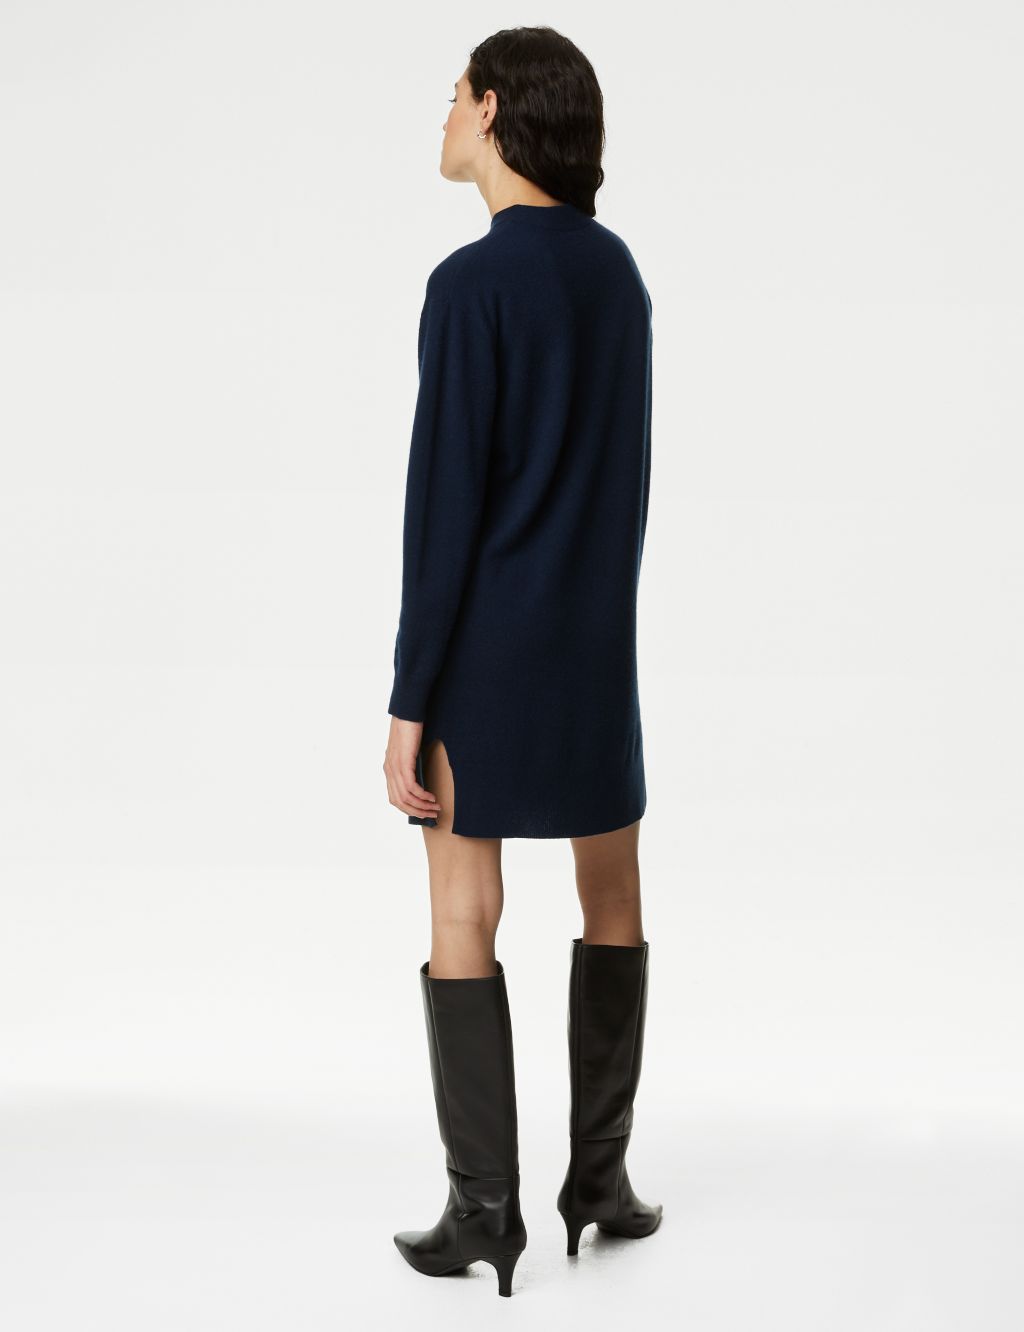 Pure Cashmere Crew Neck Mini Knitted Dress image 3